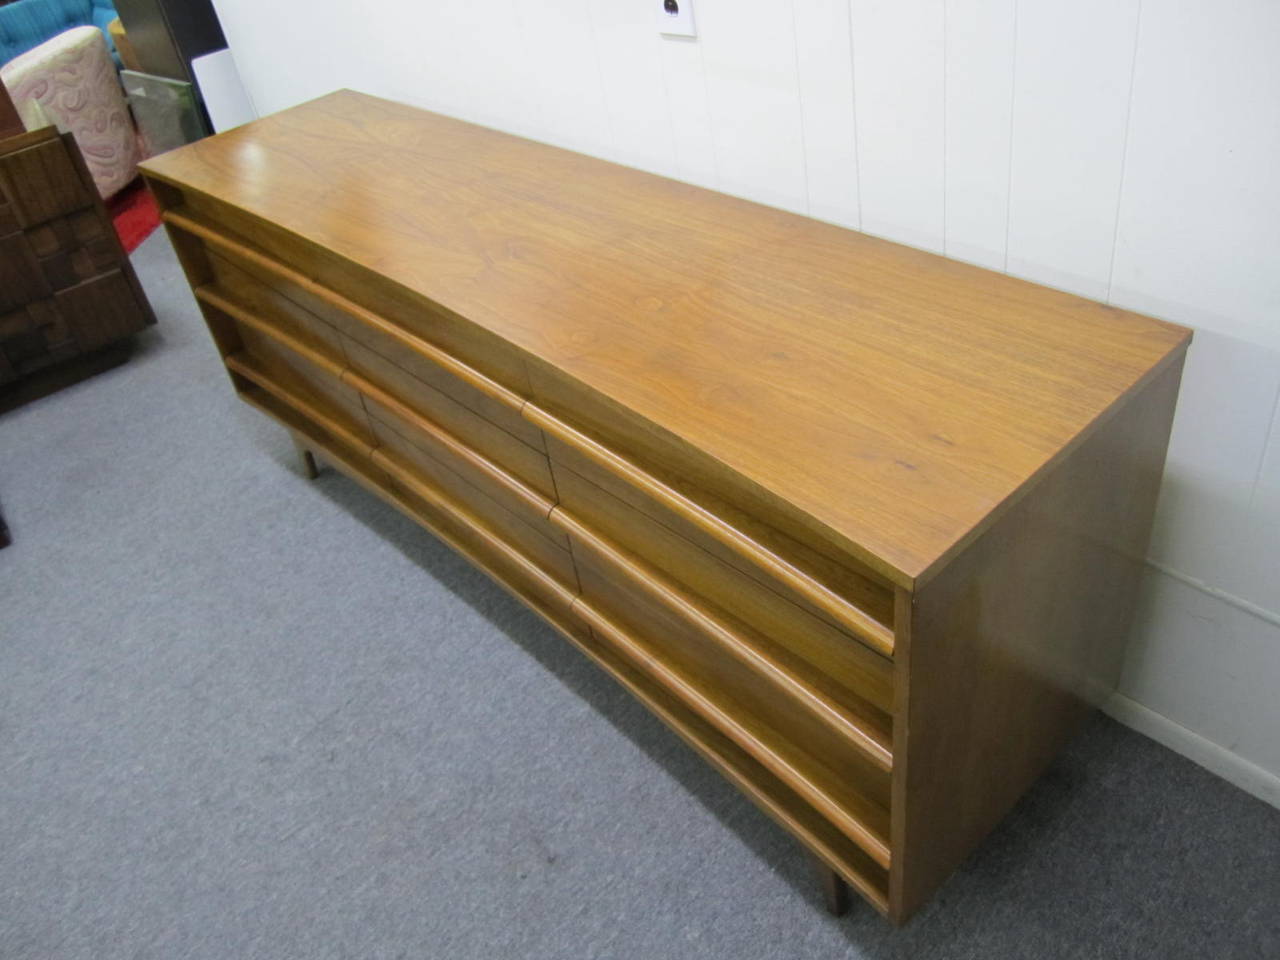 Handsome Mid-century Modern Bowed Front Walnut Credenza In Good Condition For Sale In Pemberton, NJ